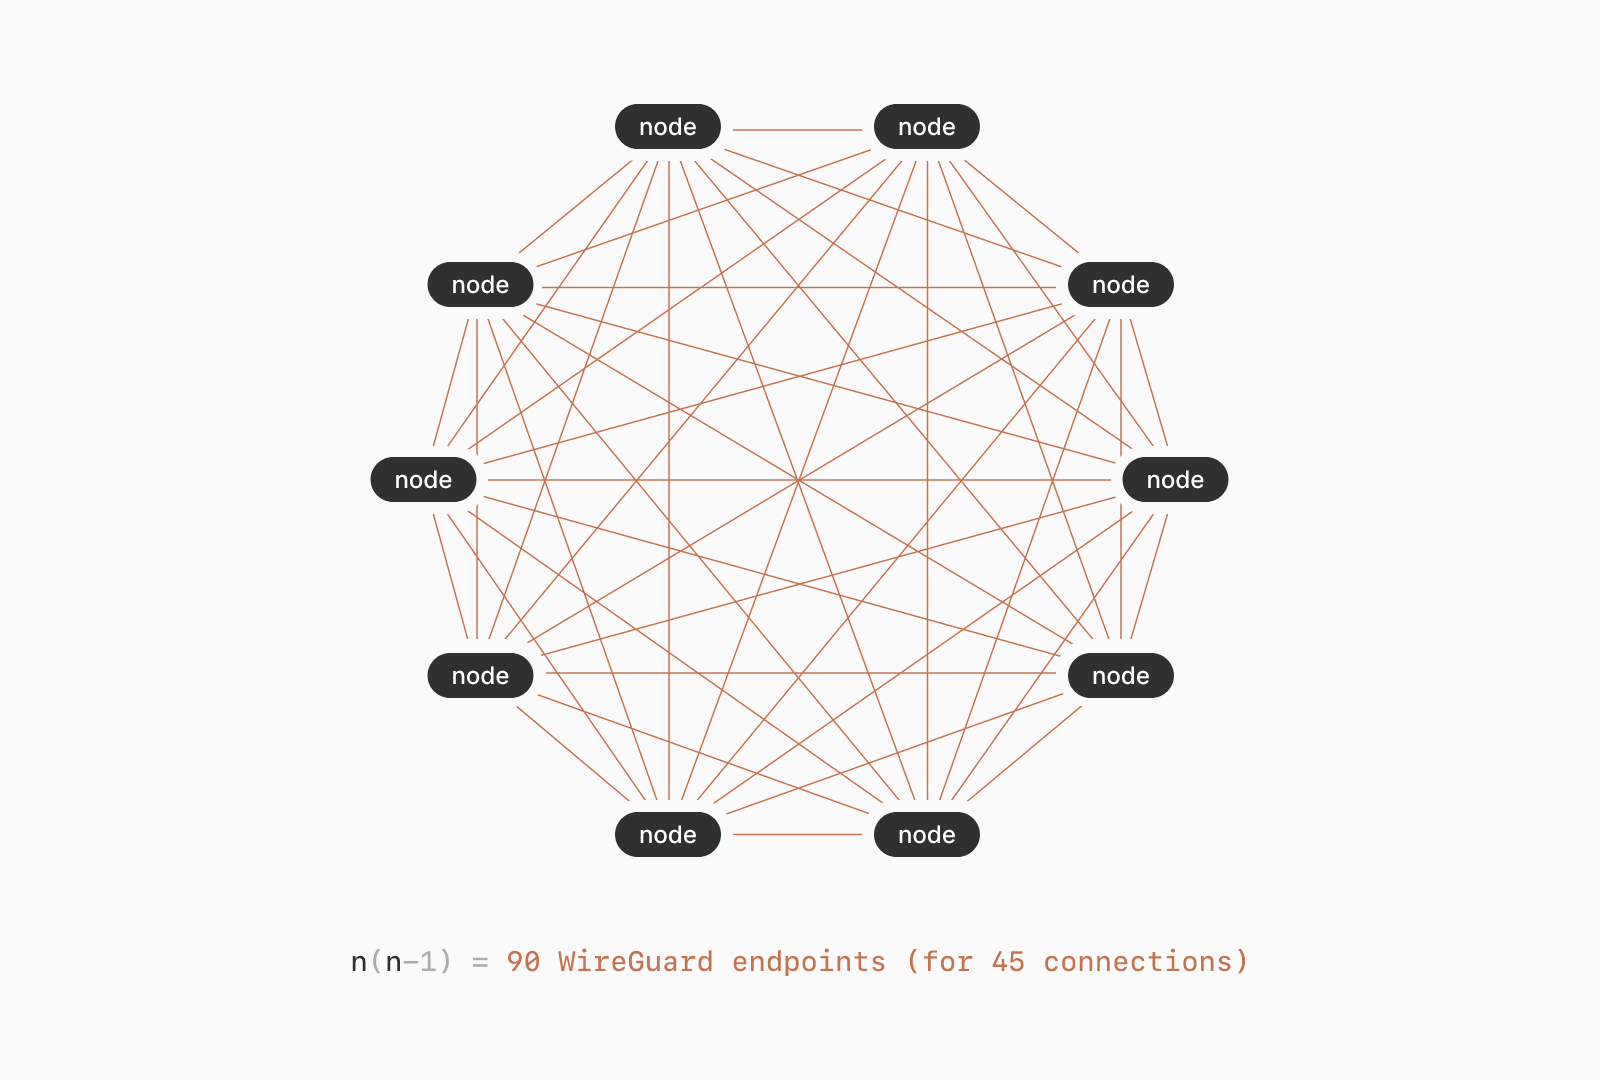 ==Tailscale - Mesh Overlay Network==